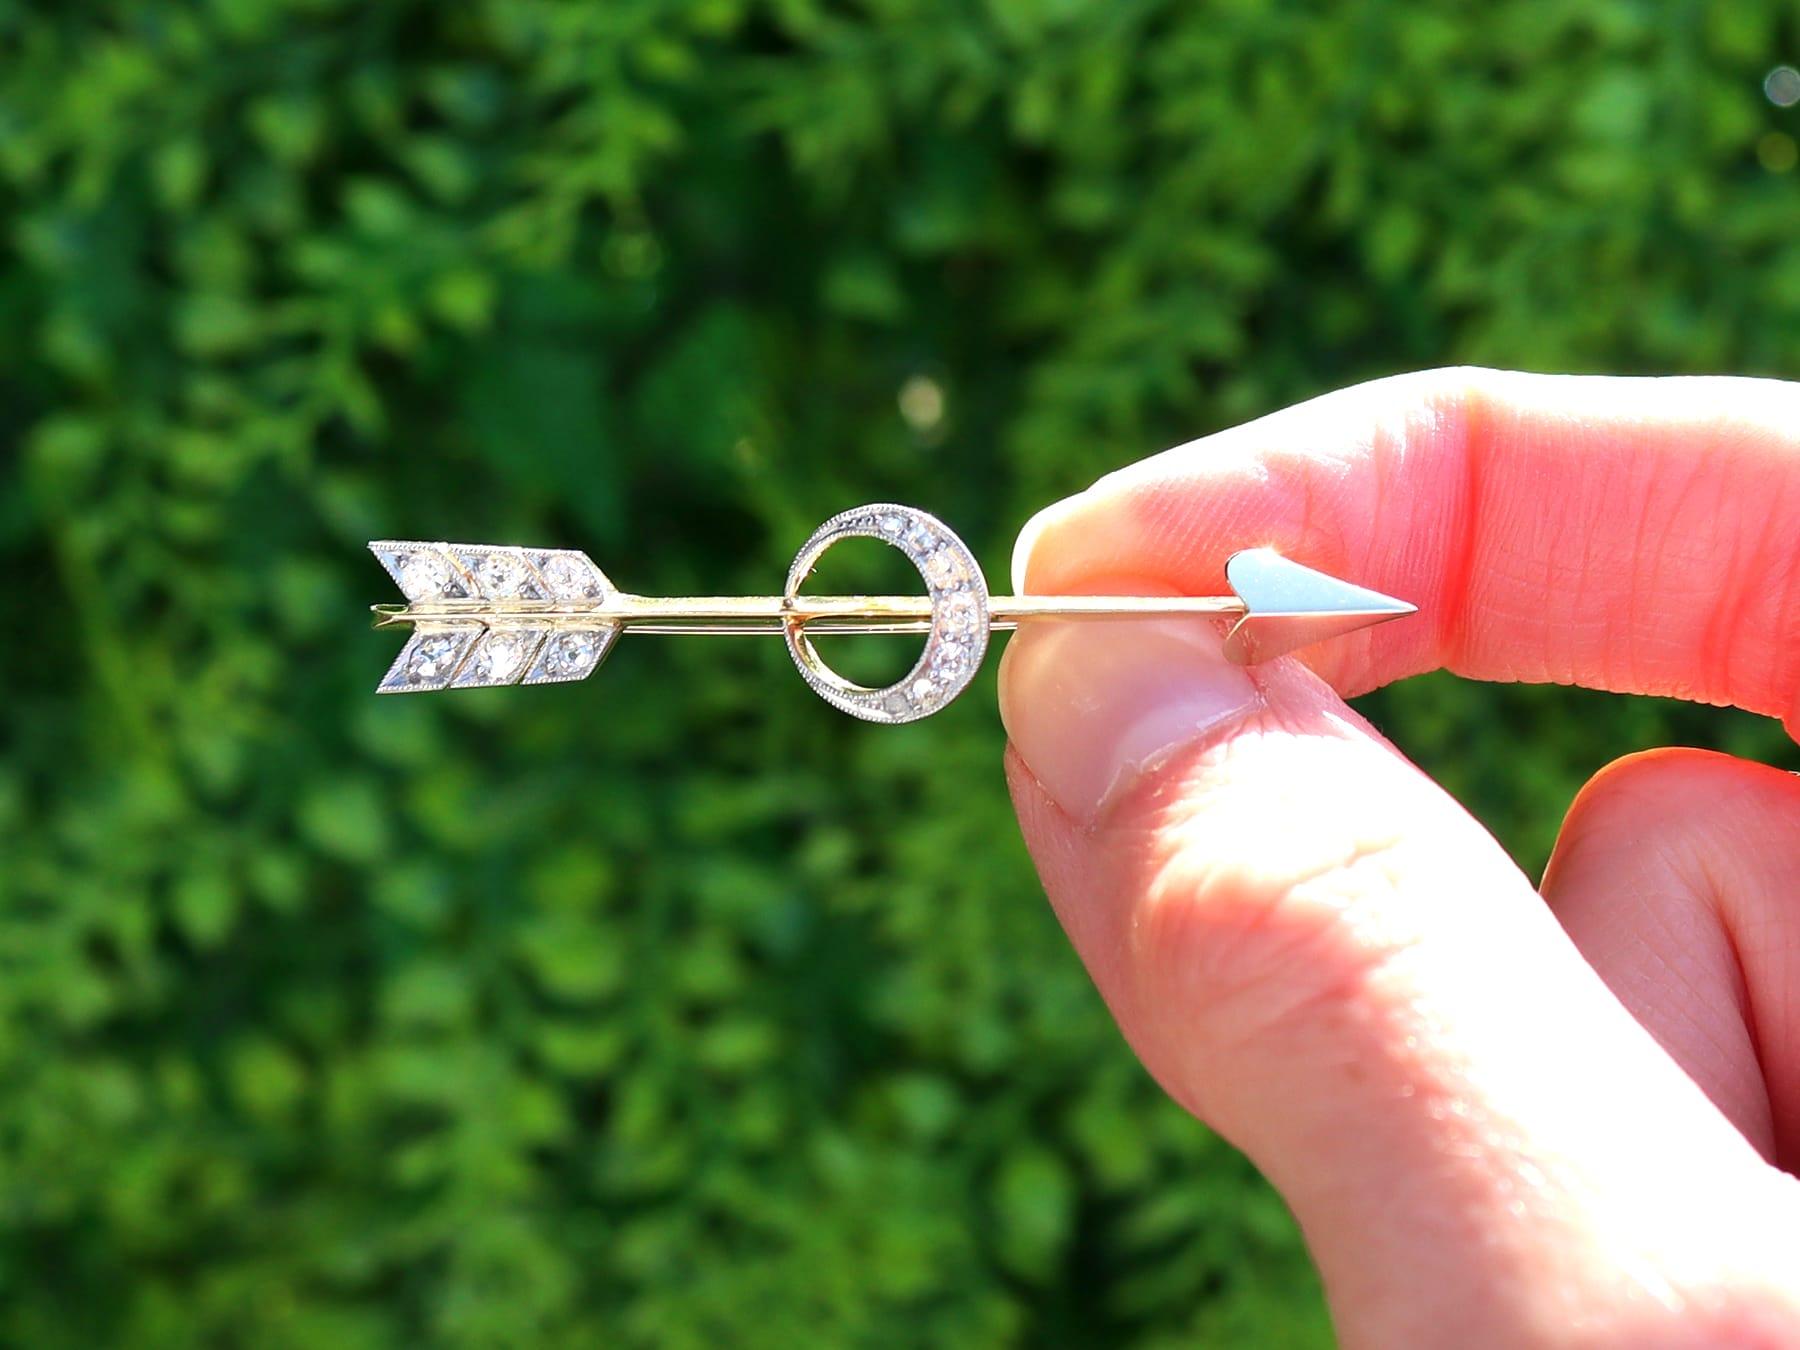 A fine and impressive 0.29 carat diamond, 15 karat yellow gold and platinum set brooch; part of our diverse antique diamond brooches and estate jewelry collections

This fine and impressive antique Victorian brooch has been crafted in 15k yellow